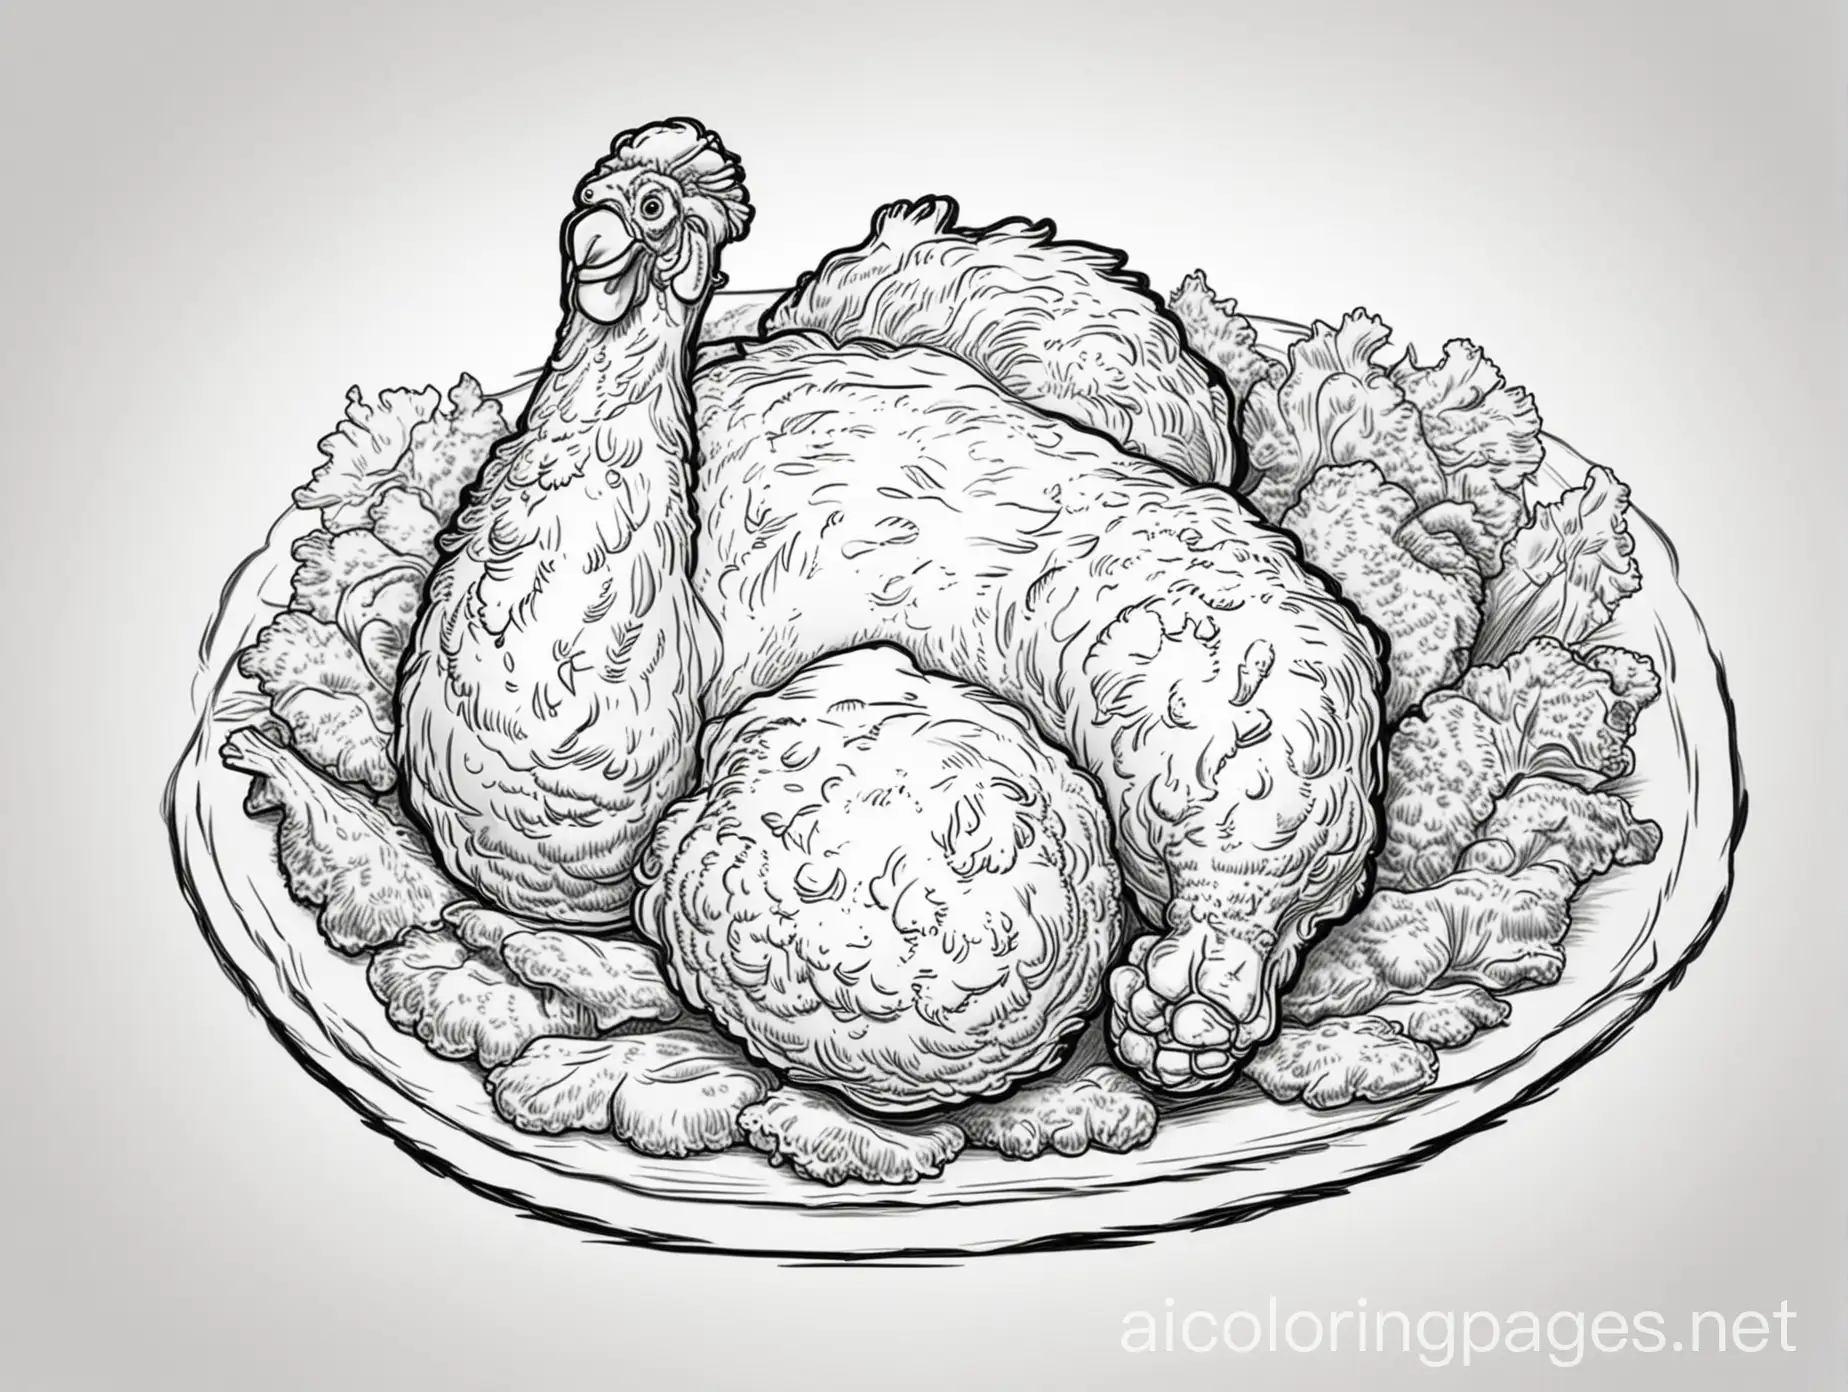 Fried chicken, Coloring Page, black and white, line art, white background, Simplicity, Ample White Space. The background of the coloring page is plain white to make it easy for young children to color within the lines. The outlines of all the subjects are easy to distinguish, making it simple for kids to color without too much difficulty